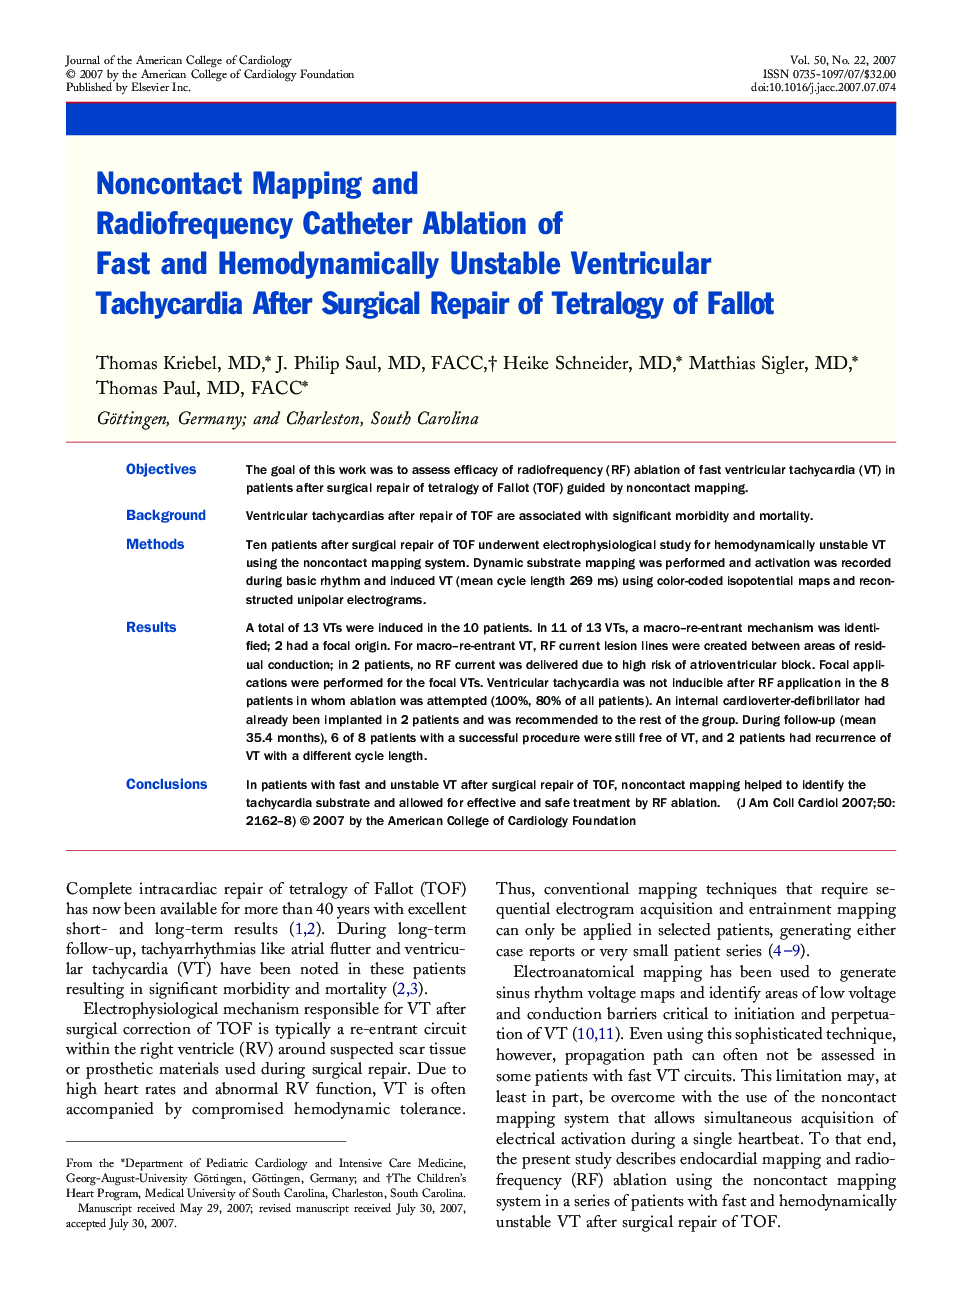 Noncontact Mapping and Radiofrequency Catheter Ablation of Fast and Hemodynamically Unstable Ventricular Tachycardia After Surgical Repair of Tetralogy of Fallot